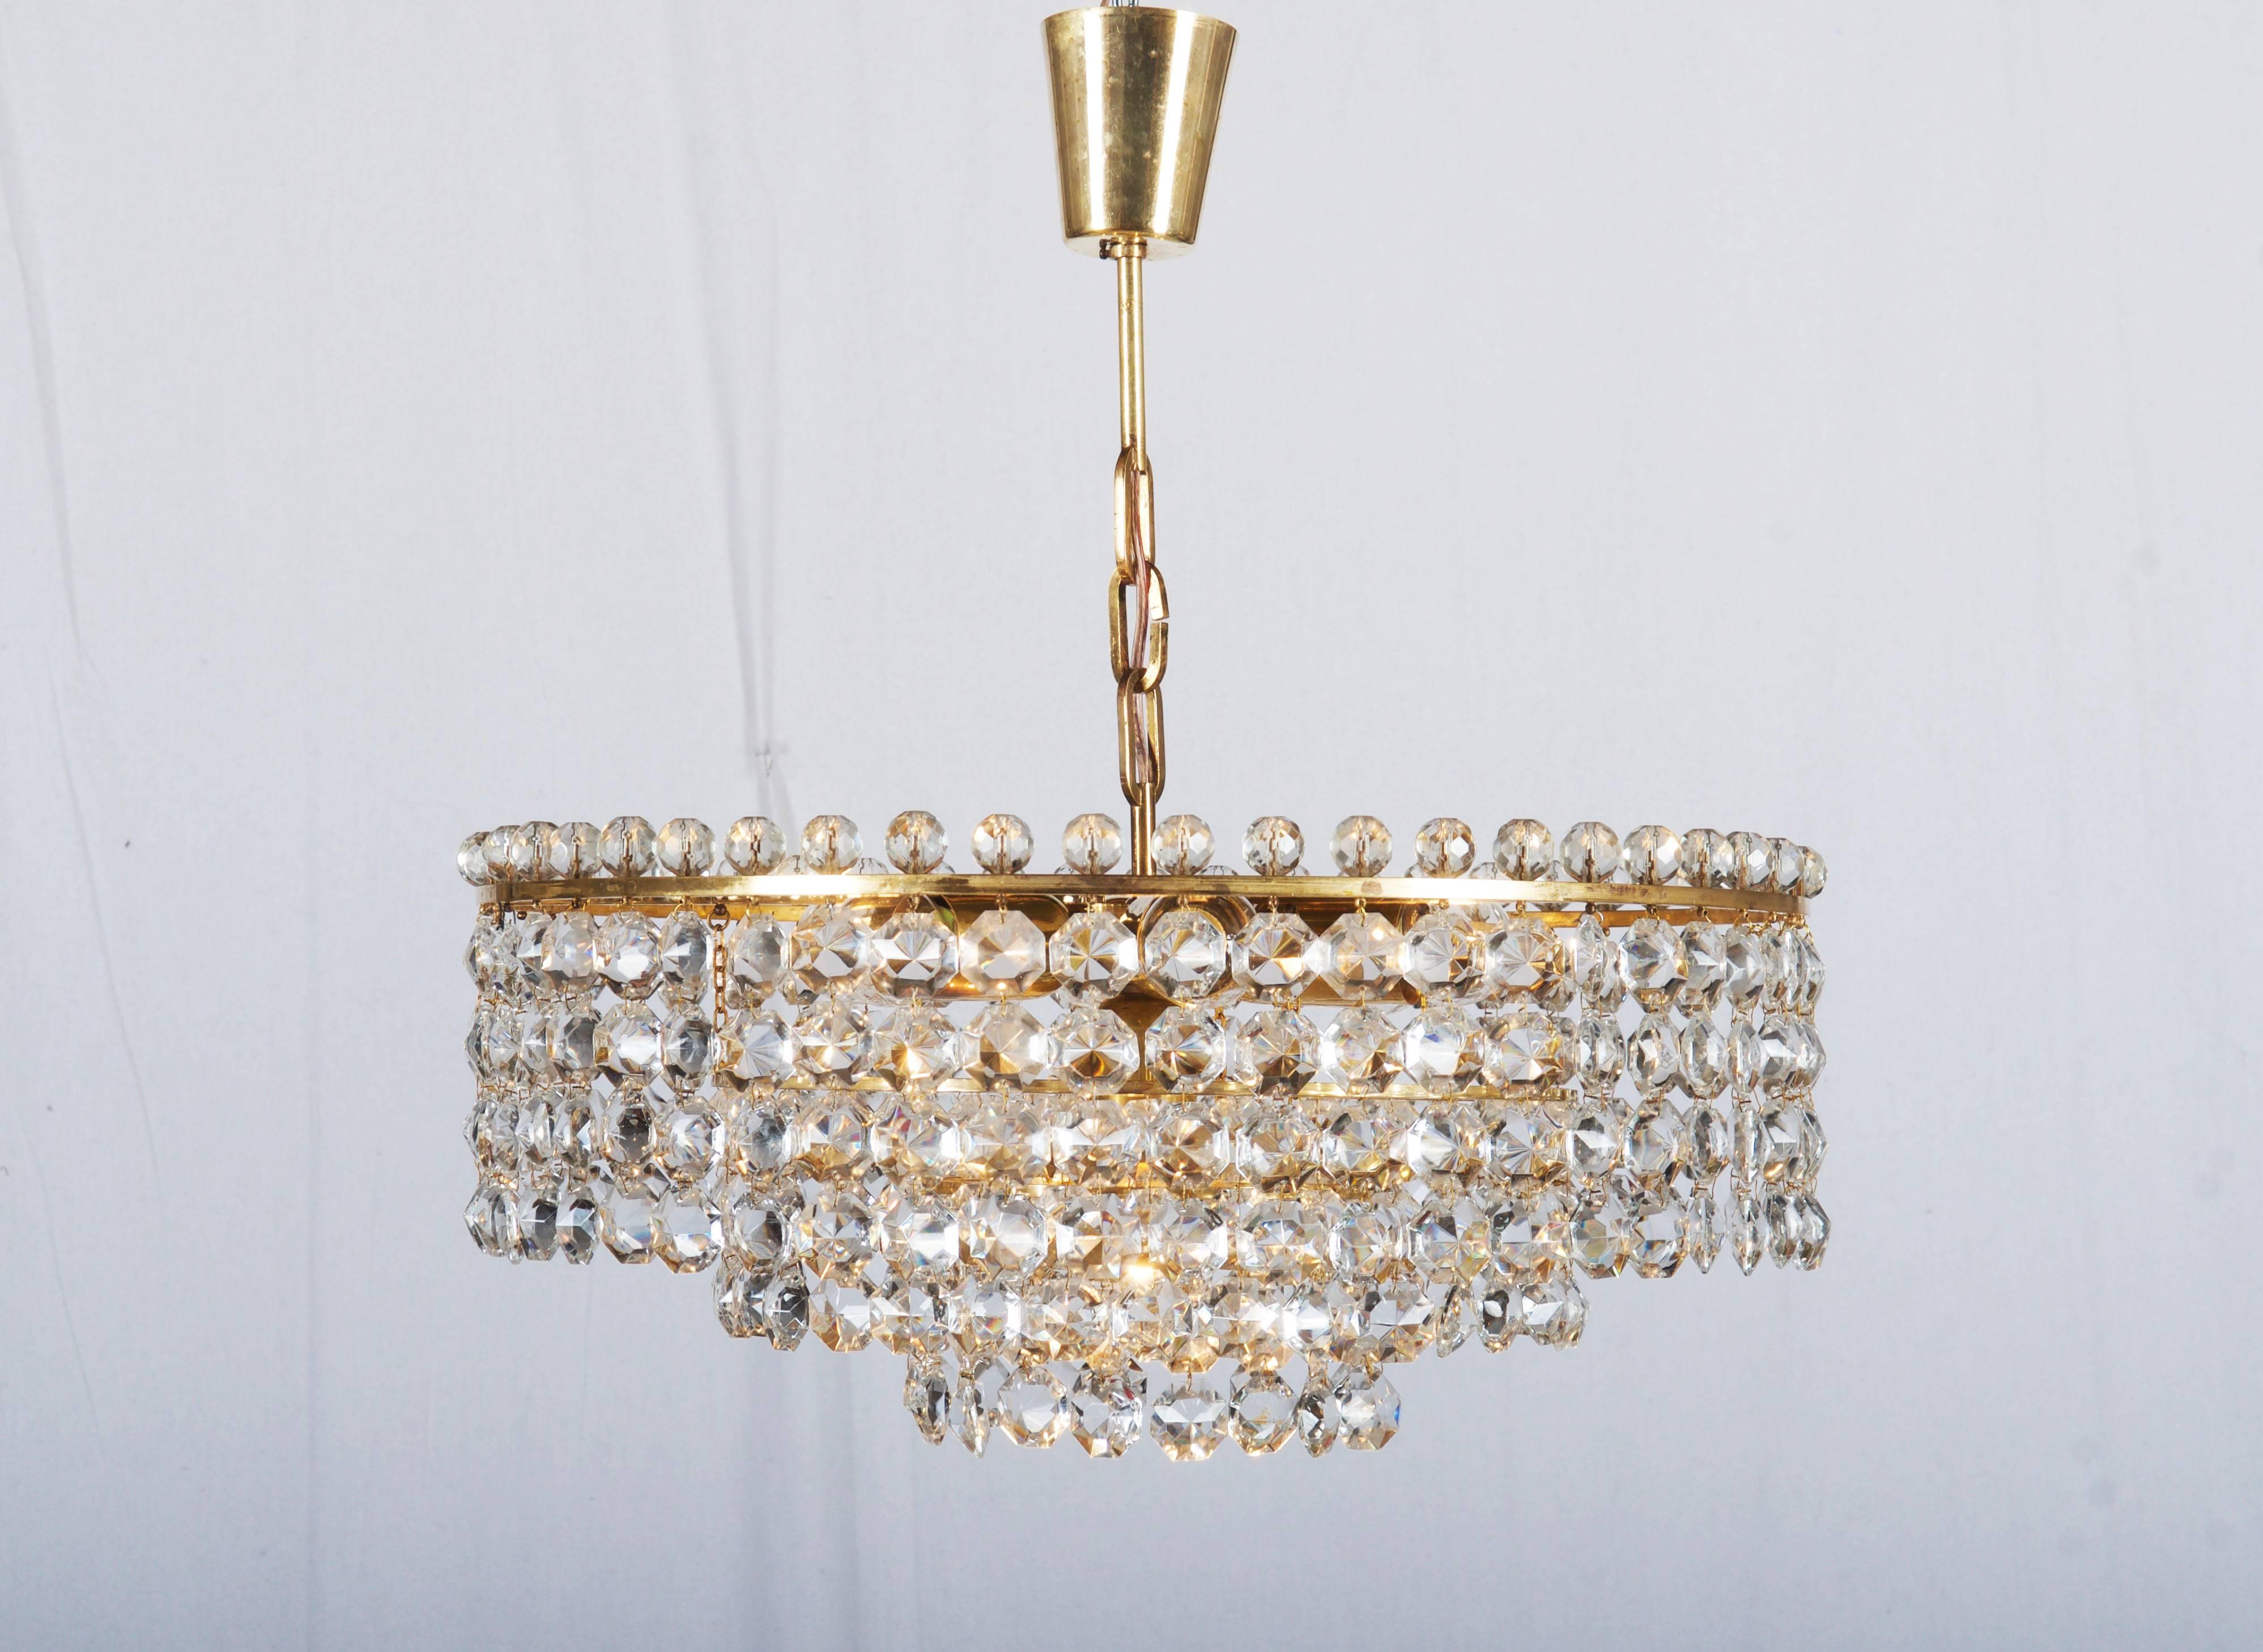 Three layers brass construction with cut crystal elements (octagons and pearls) fitted with seven E27sockets up to 60 watts each.
Made in Vienna in the 1960s by J.L. Lobmeyr.
Dimension of the chandelier only is: diameter 51 cm (20